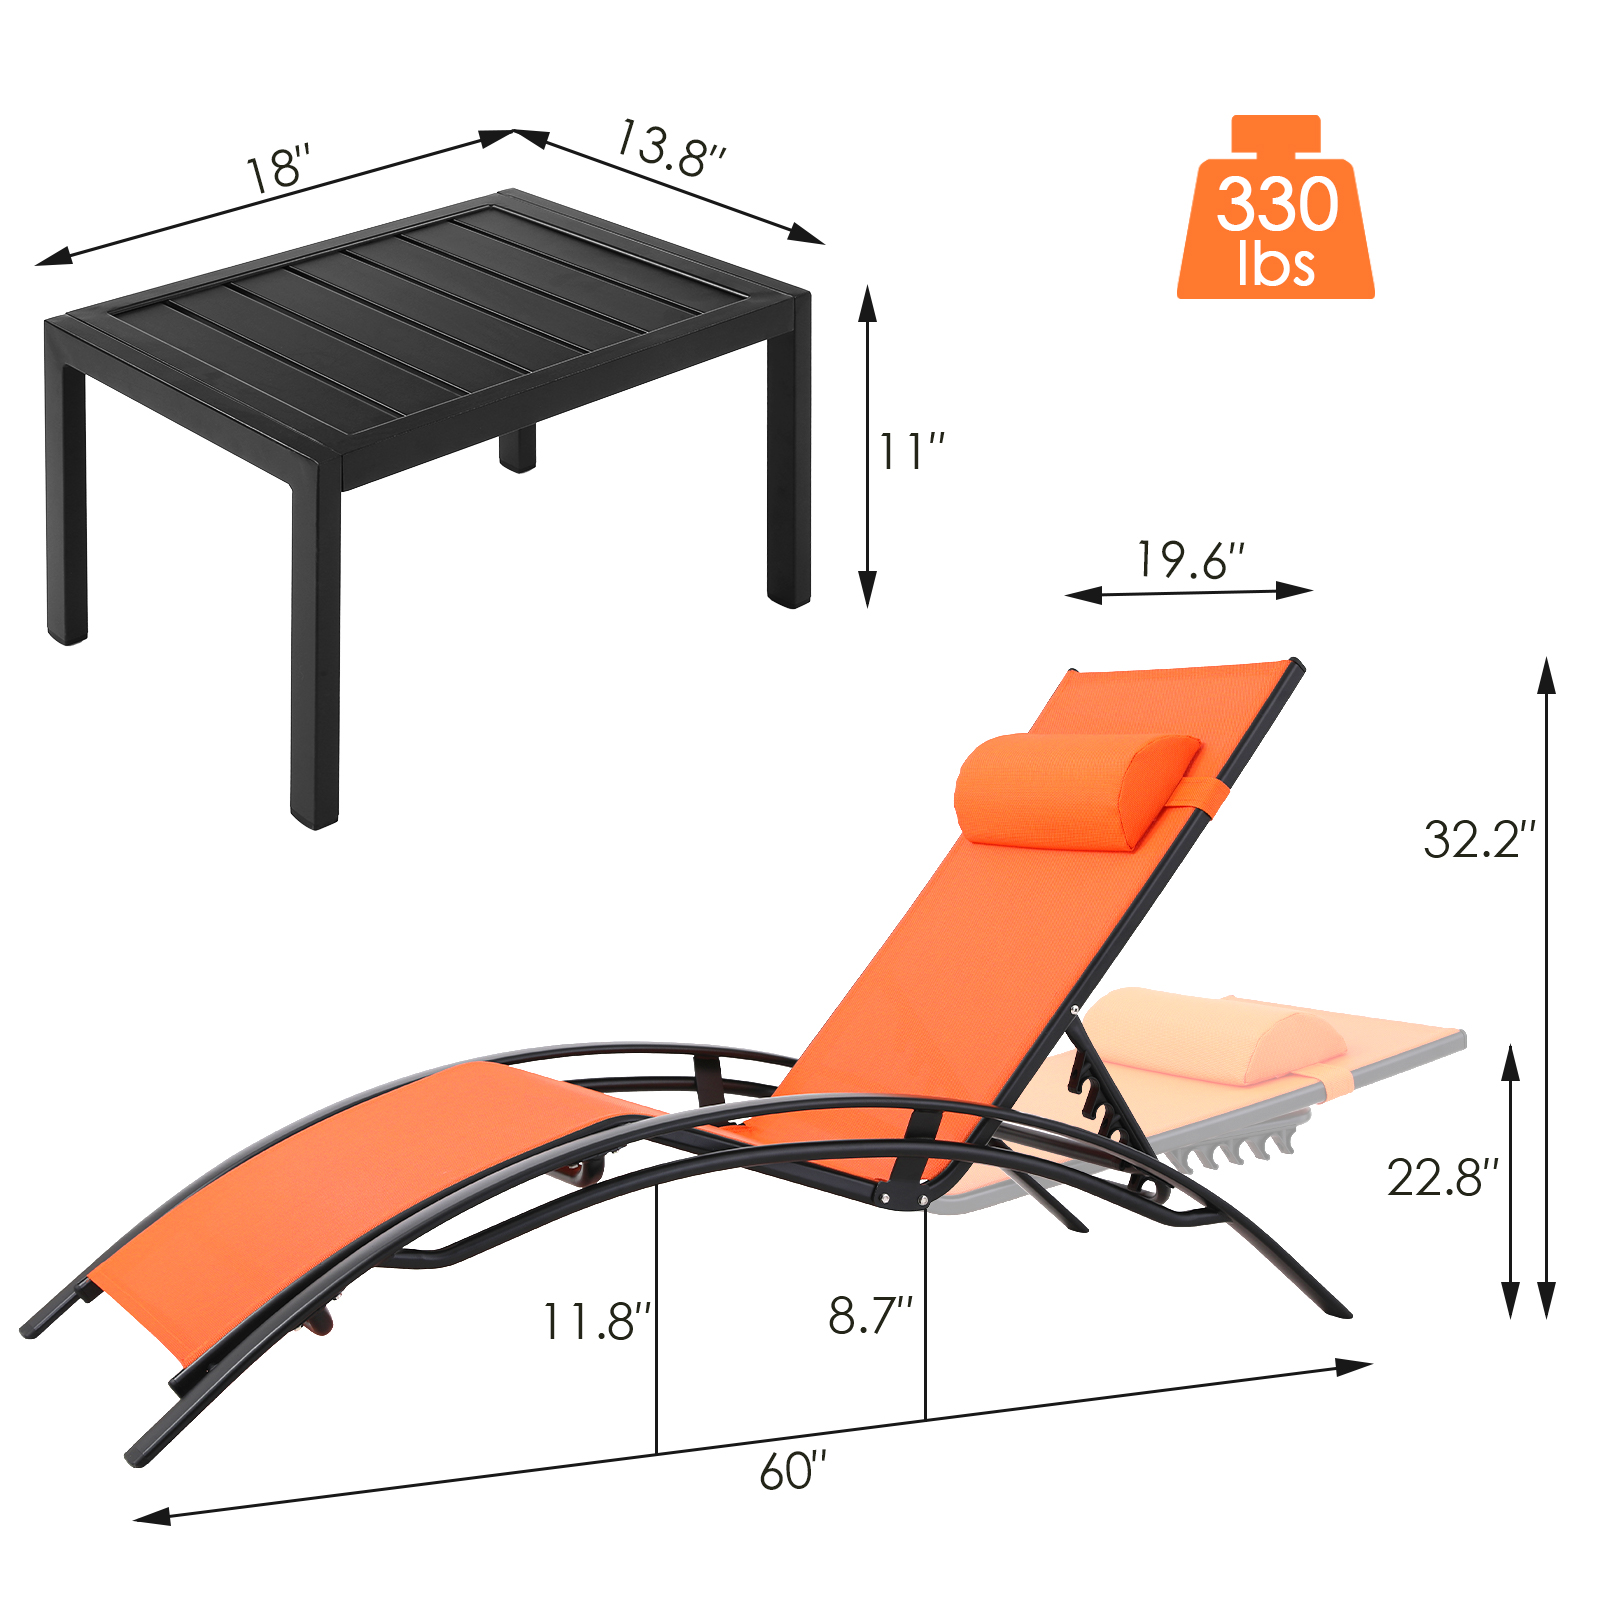 LAZY BUDDY 3pcs Outdoor Beach Pool Chaise Lounge Chairs, Sunbathing Lounger Recliner Chair with Side Table - image 3 of 8